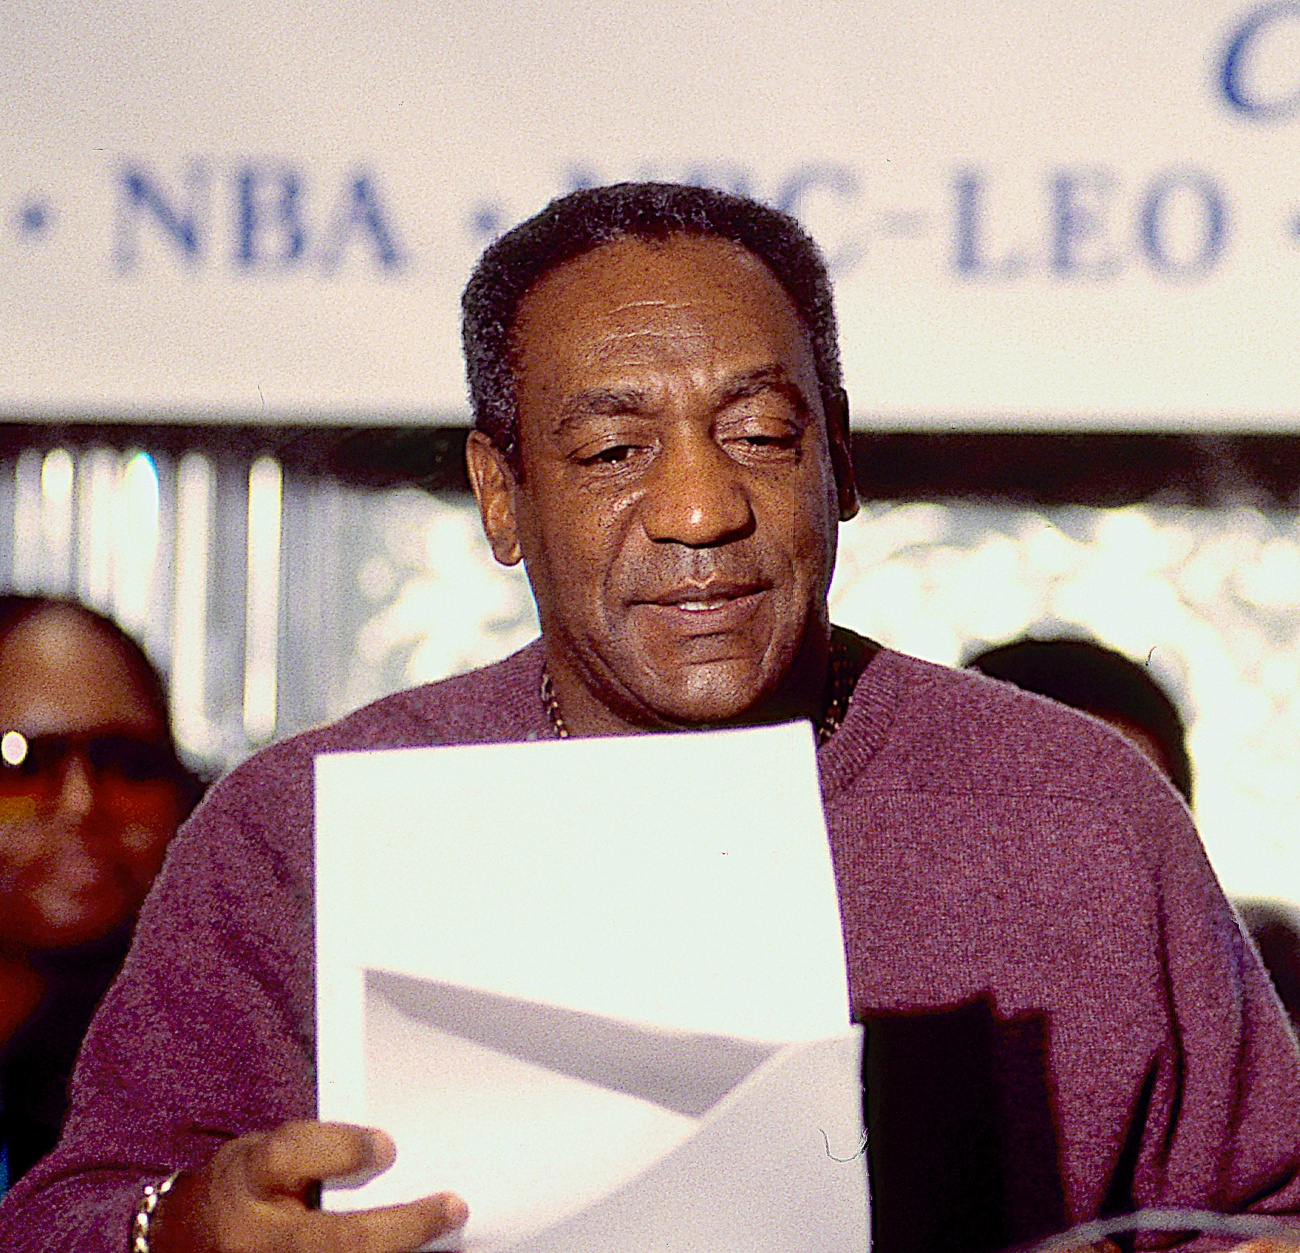 Bill Cosby receives new accusation: alleged assault of model in 1969 after drugging her